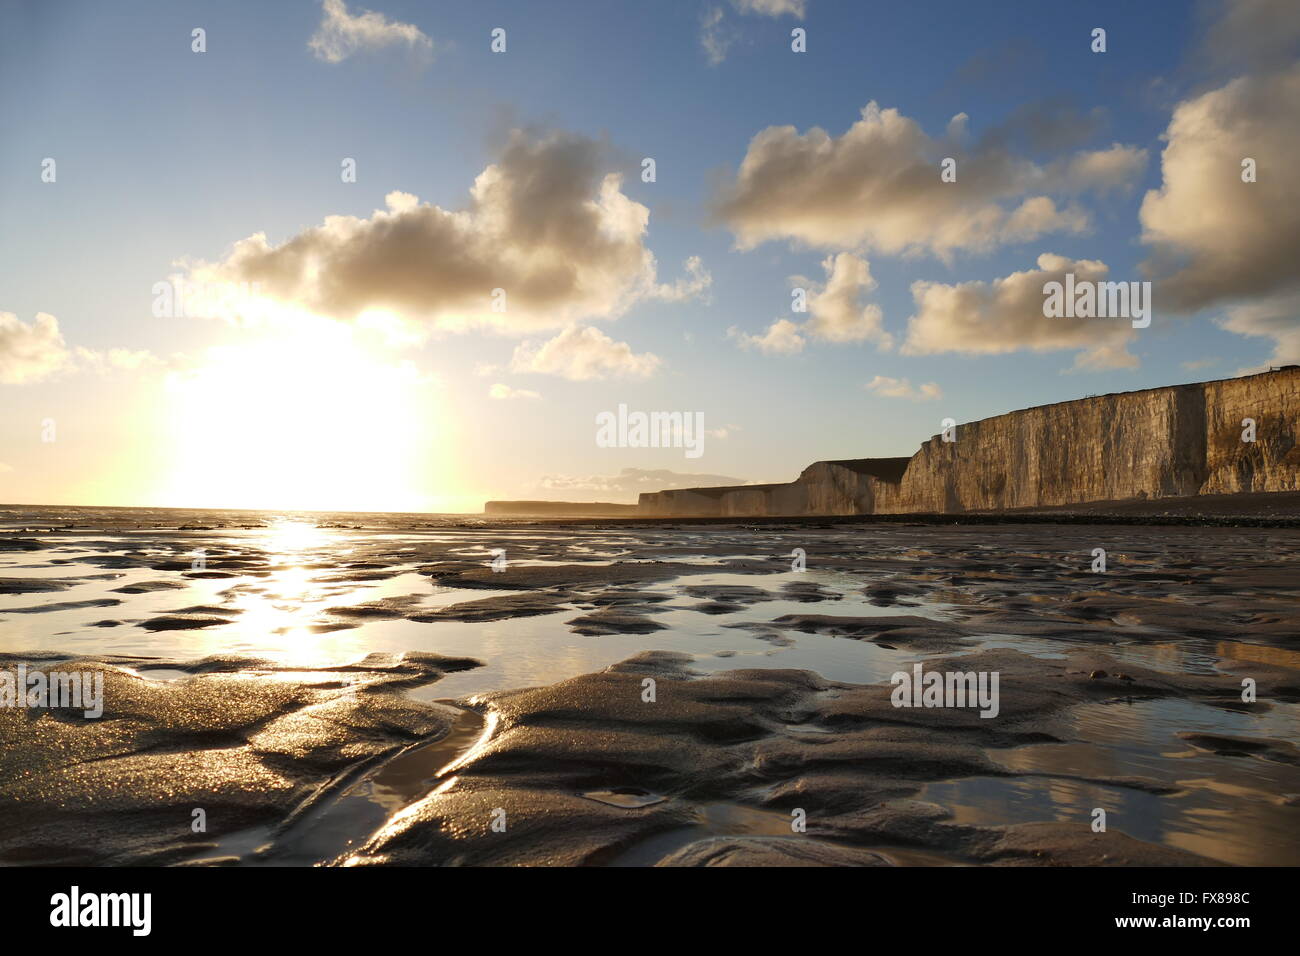 The famous landscape around Seven Sister, Seaford, UK Stock Photo